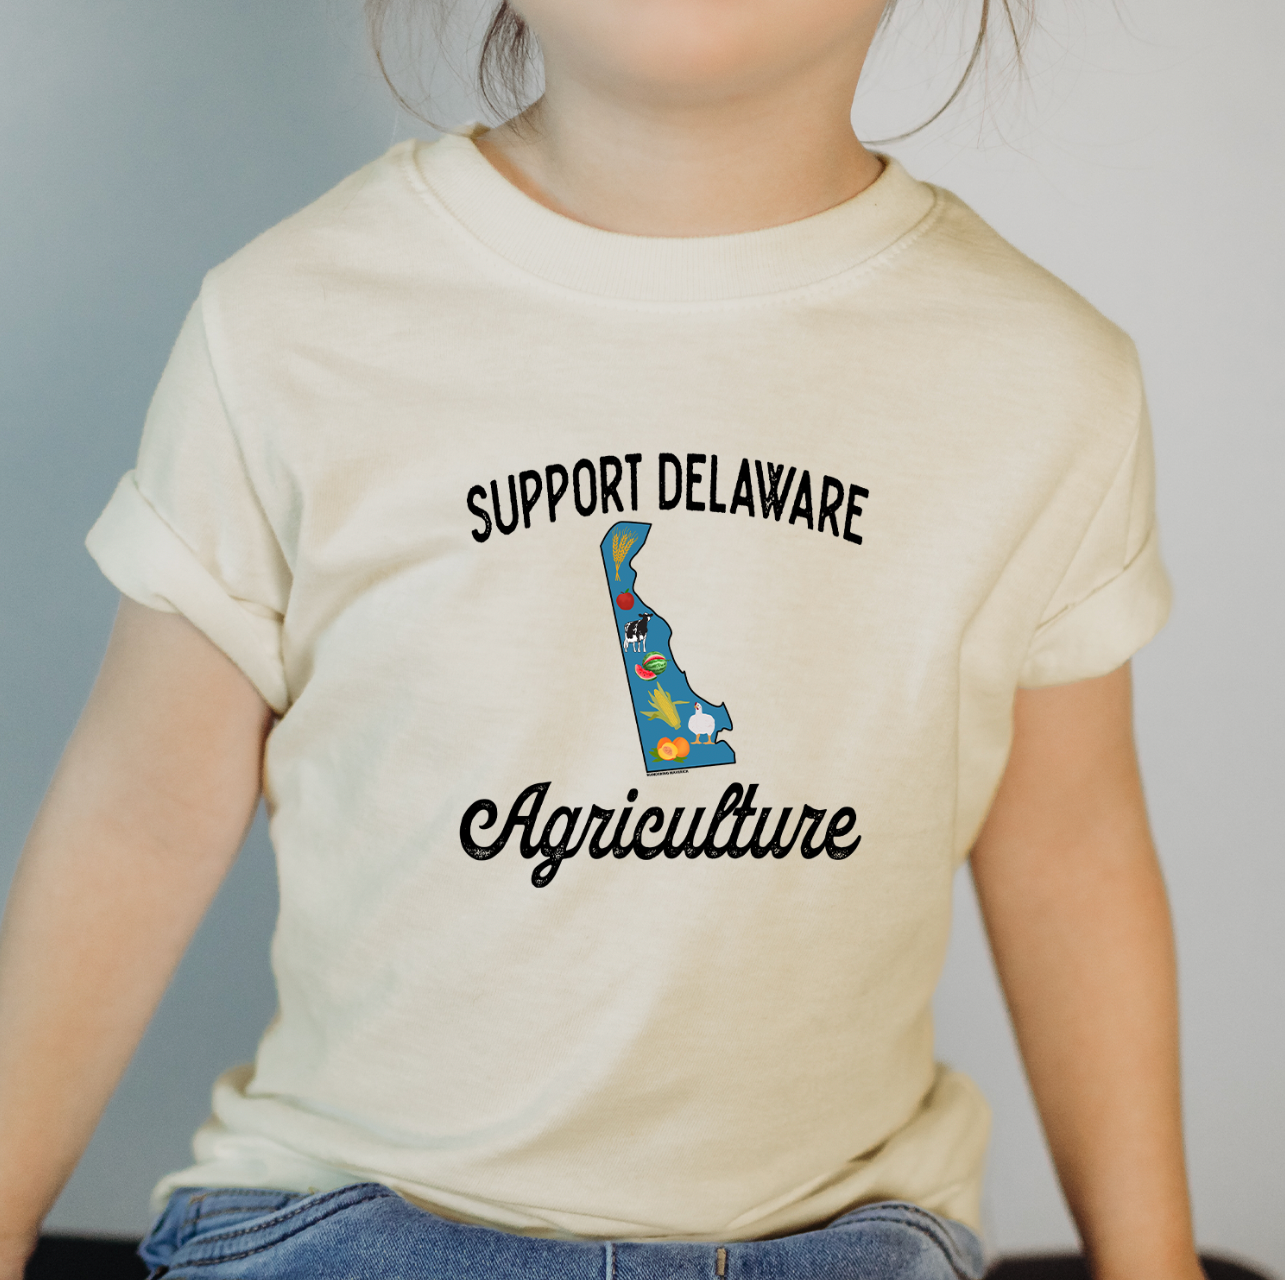 Support Delaware Agriculture One Piece/T-Shirt (Newborn - Youth XL) - Multiple Colors!